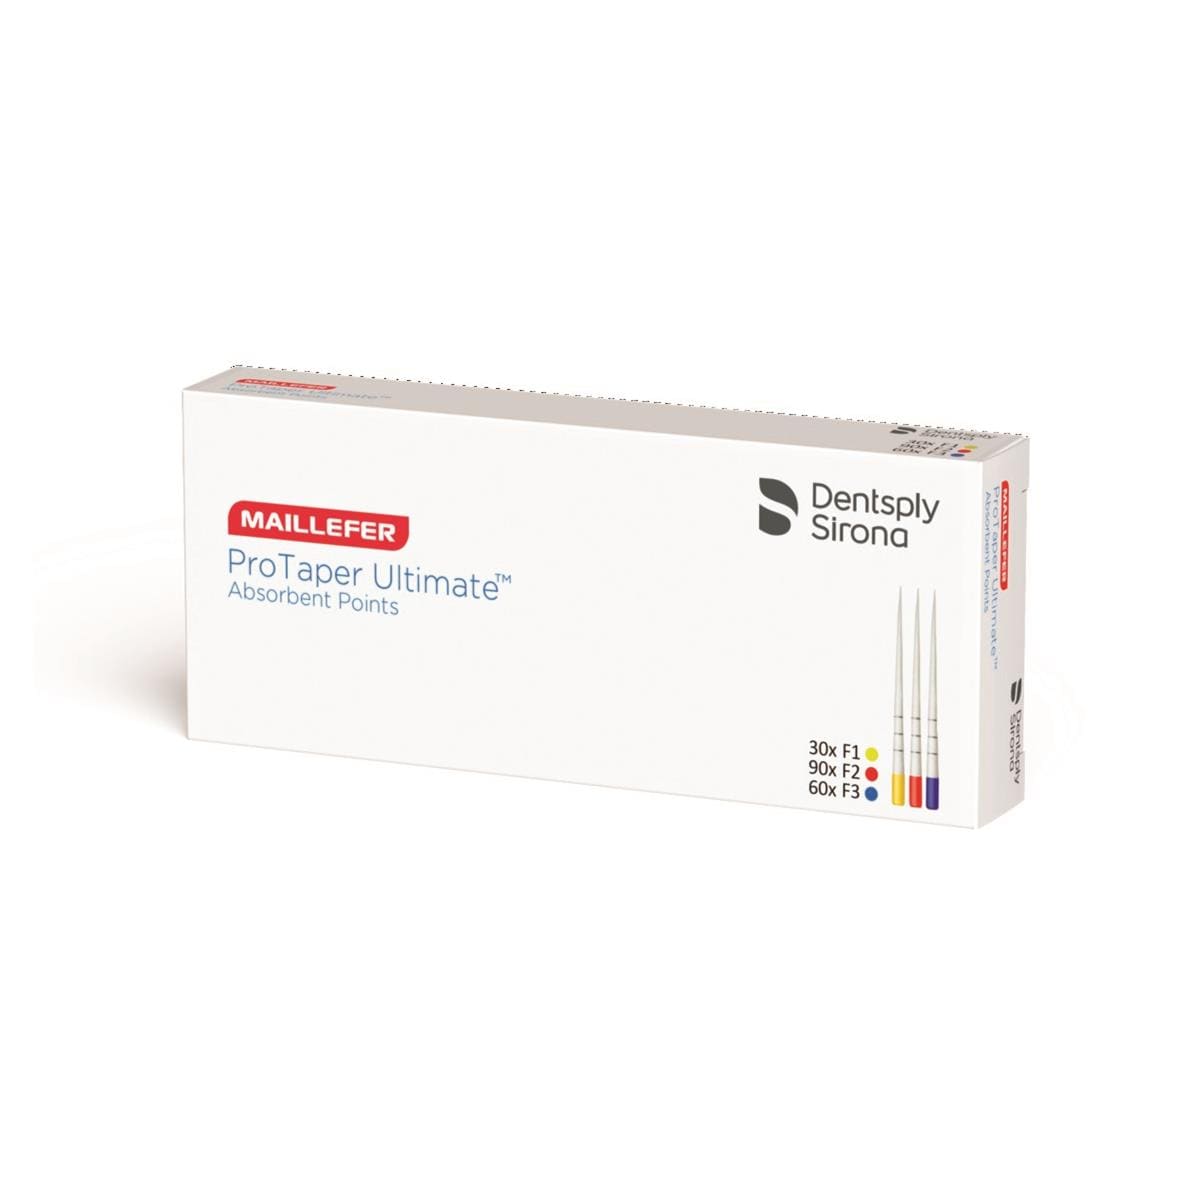 ProTaper Ultimate Absorbent Point FX (bote de 180) Dentsply Sirona